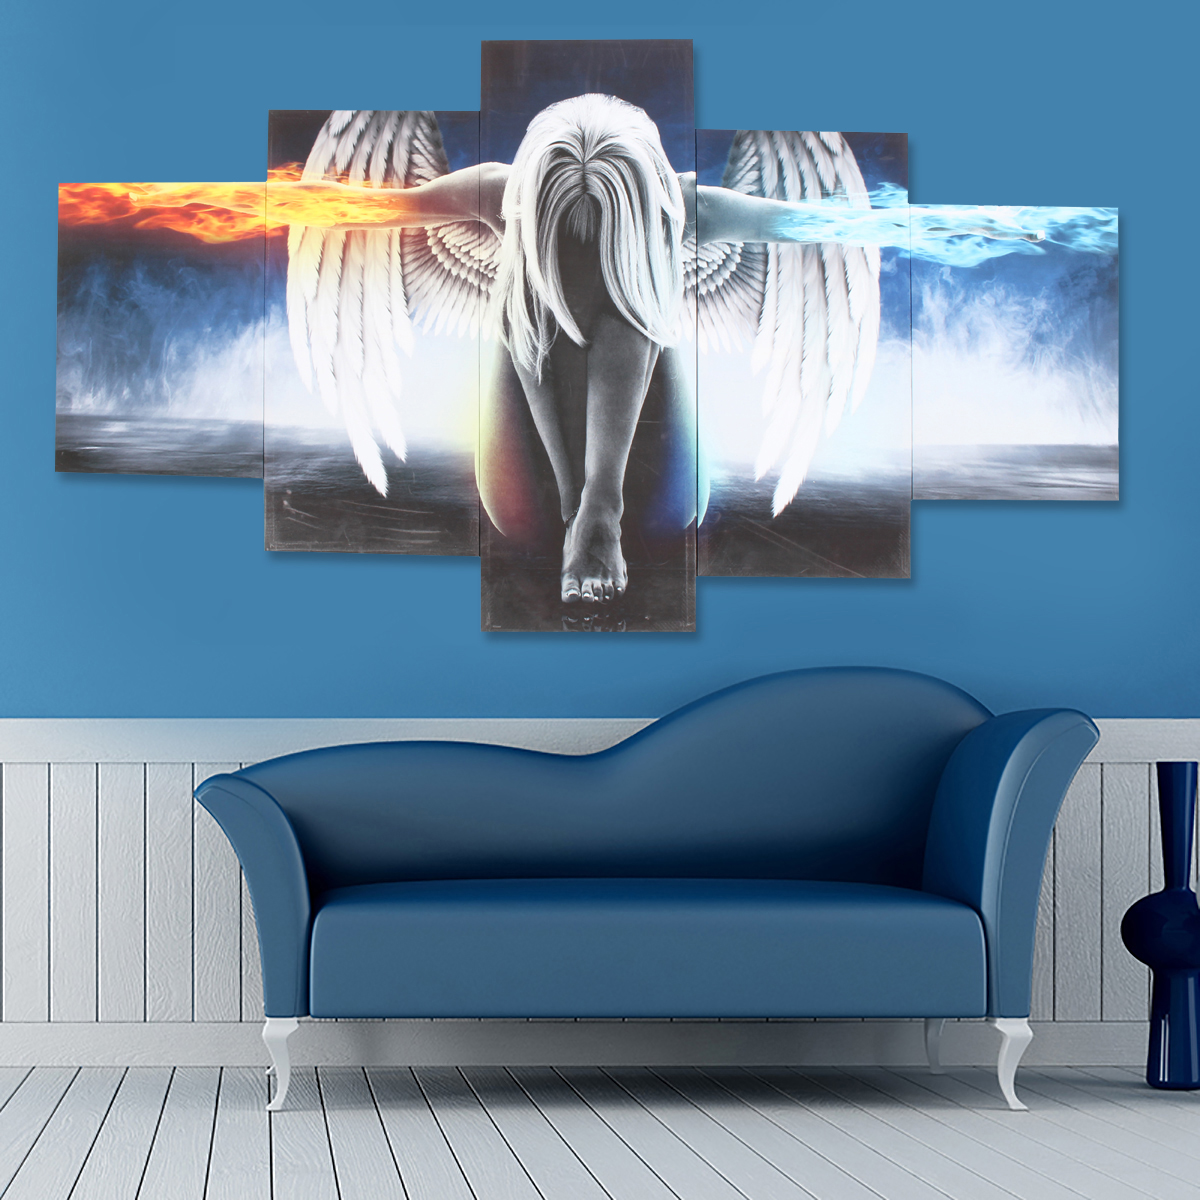 5PCS-Angel-Canvas-Print-Painting-Modern-Art-Wall-Picture-Home-Decor-Decoration-with-Framed-for-Home--1219145-5